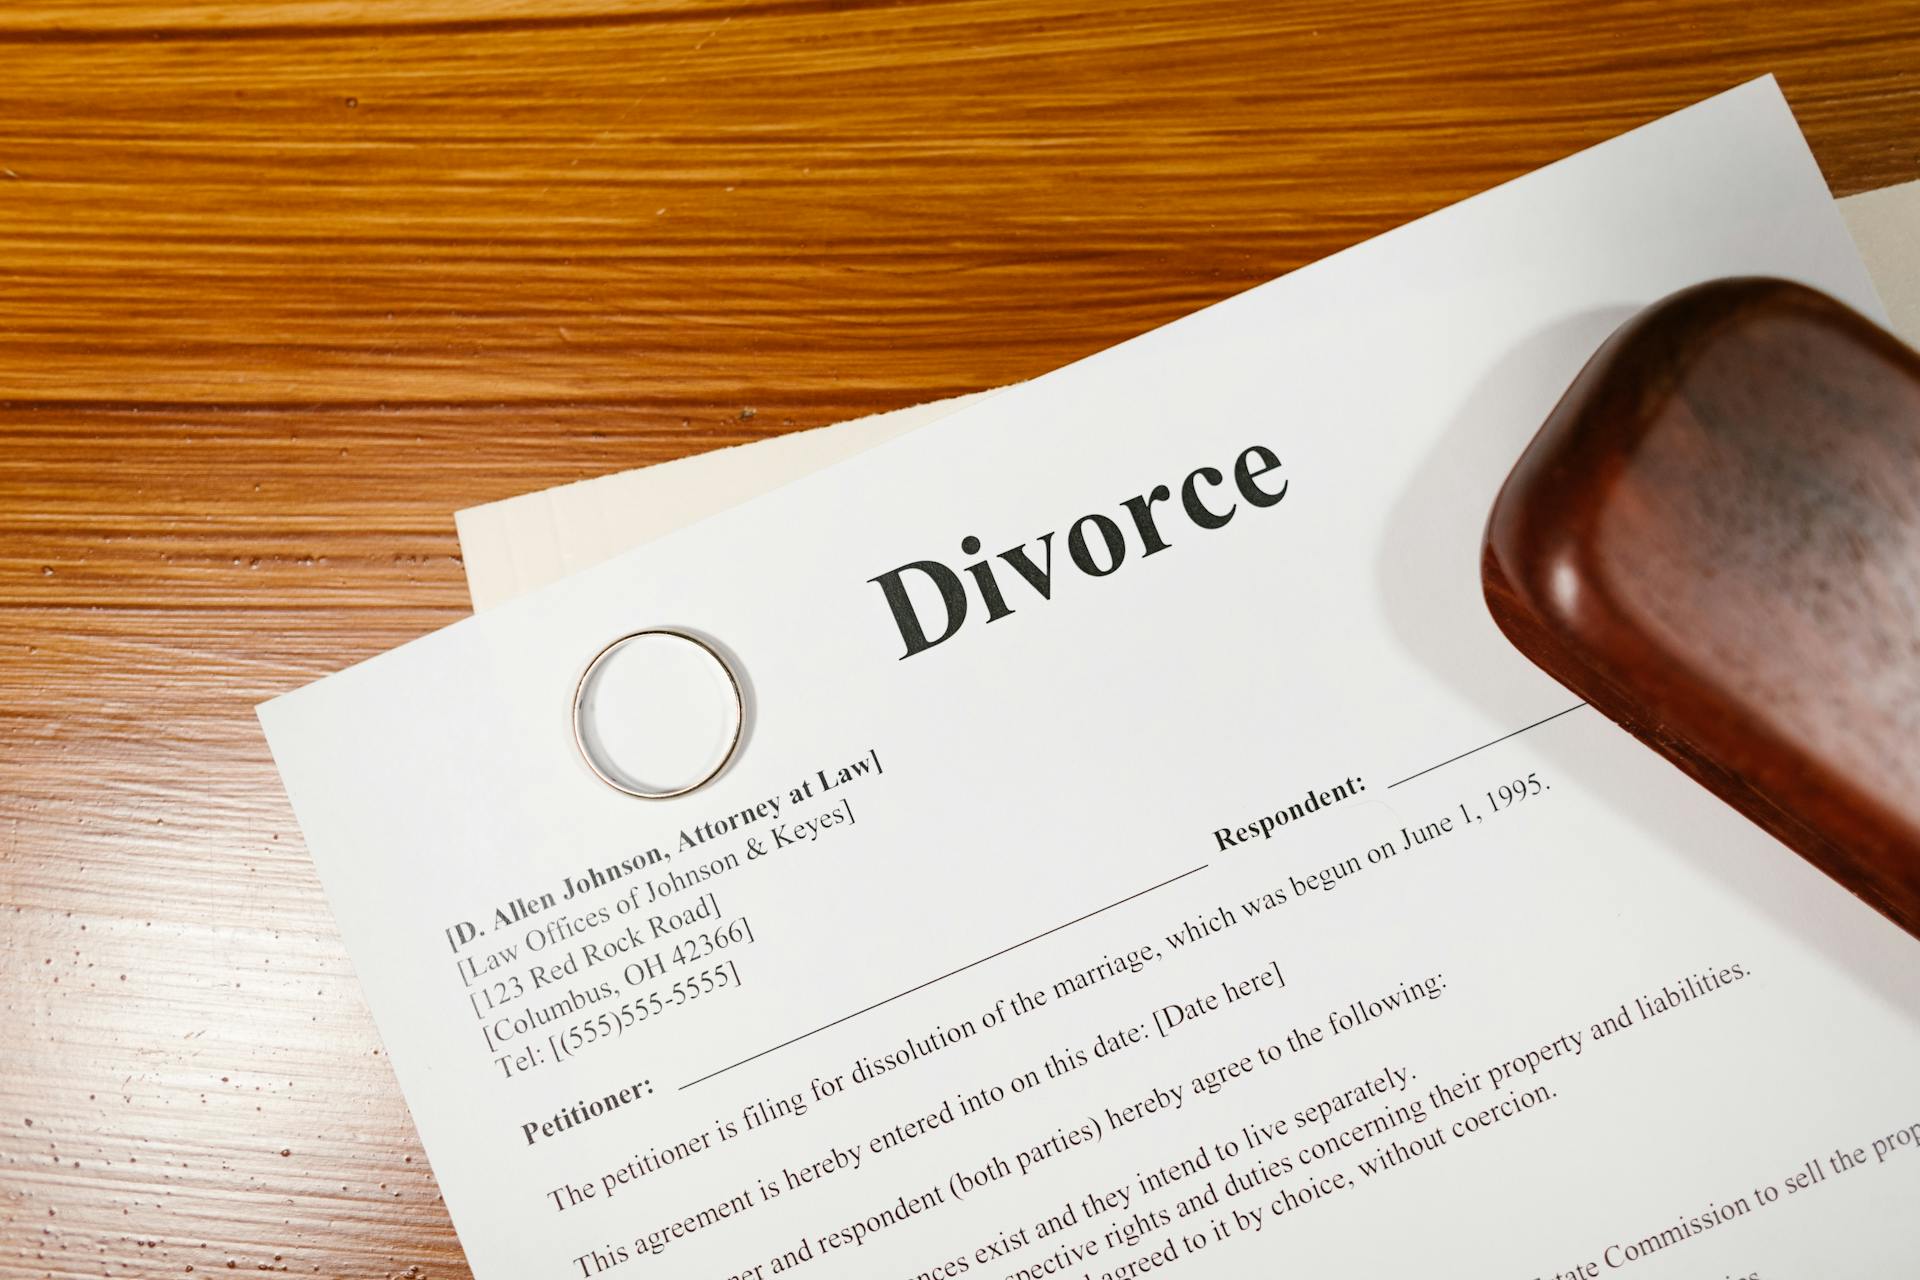 Divorce papers lying on a wooden table | Source: Pexels